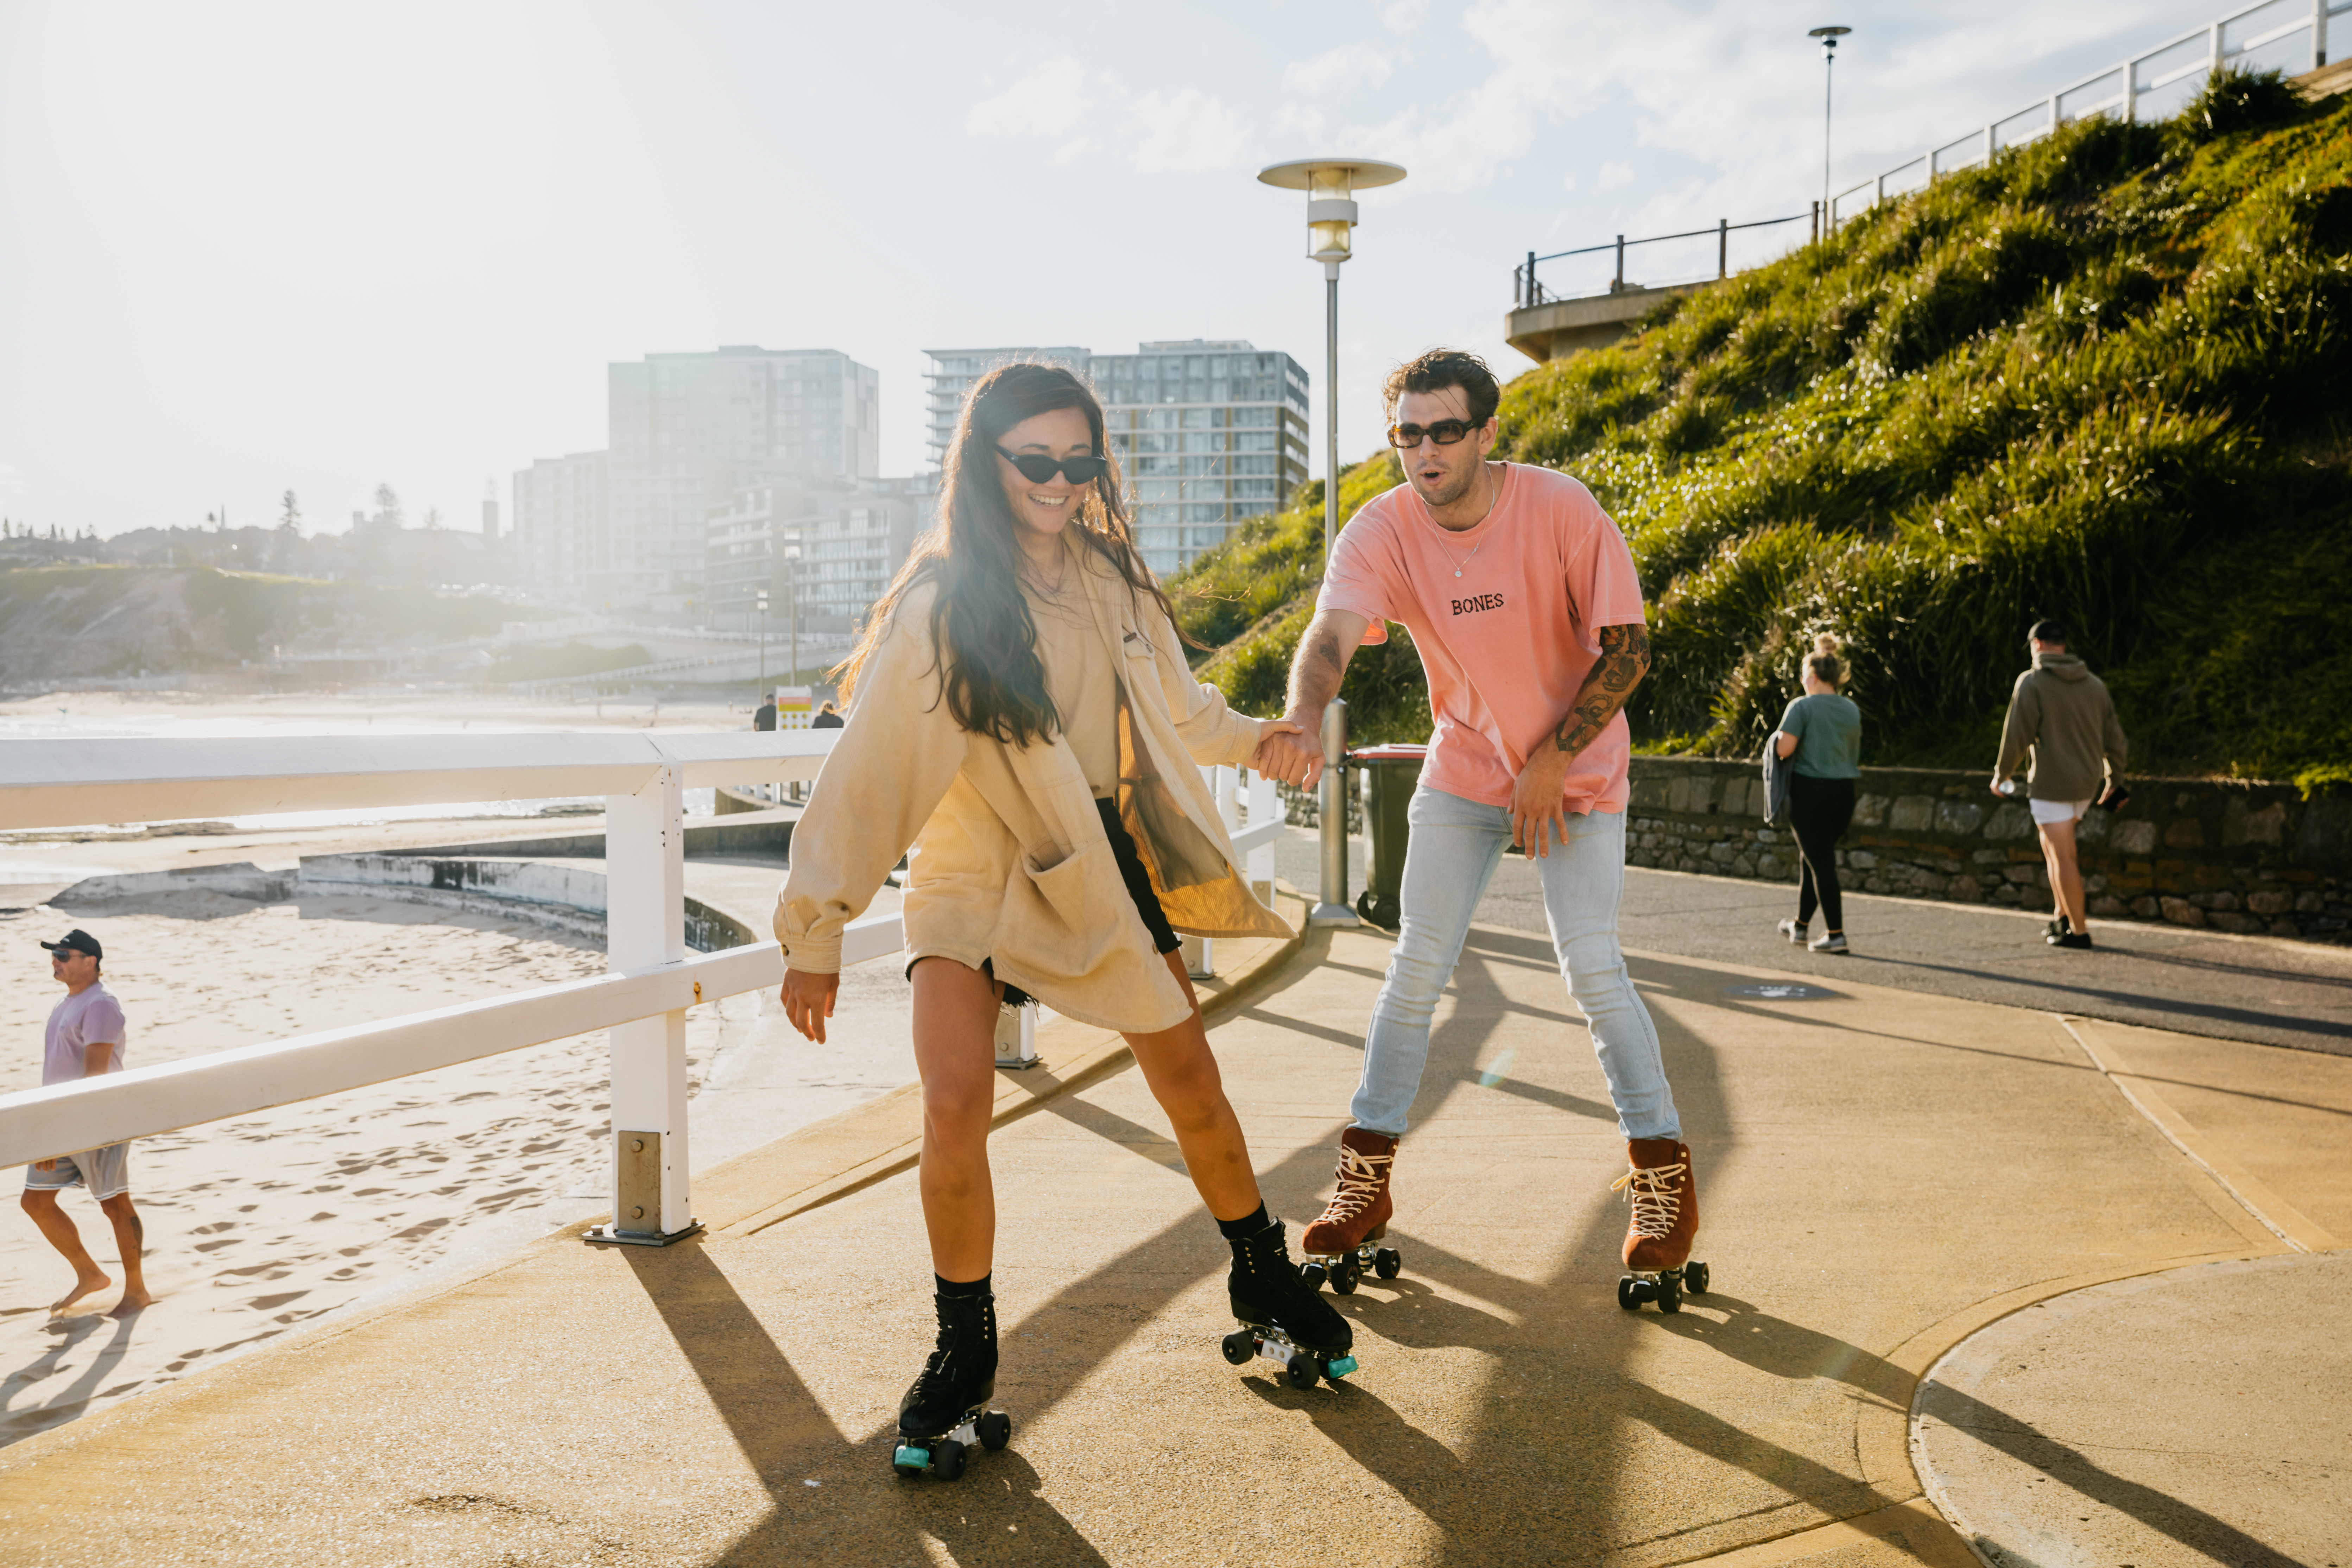 A couple roller skating on a path next to the beach with a city in the background